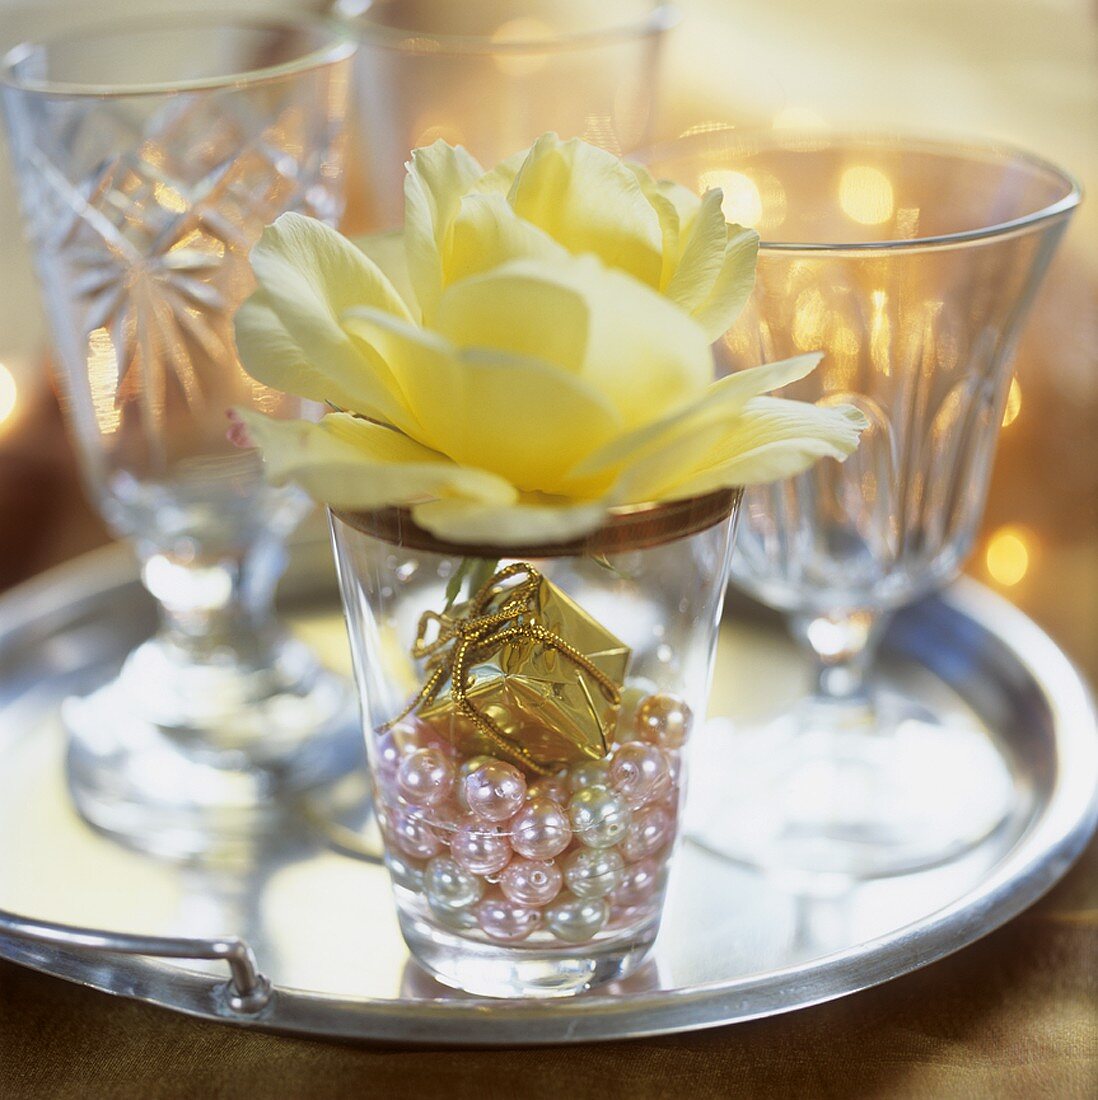 Festive decoration: tiny parcel, beads & yellow rose in glass